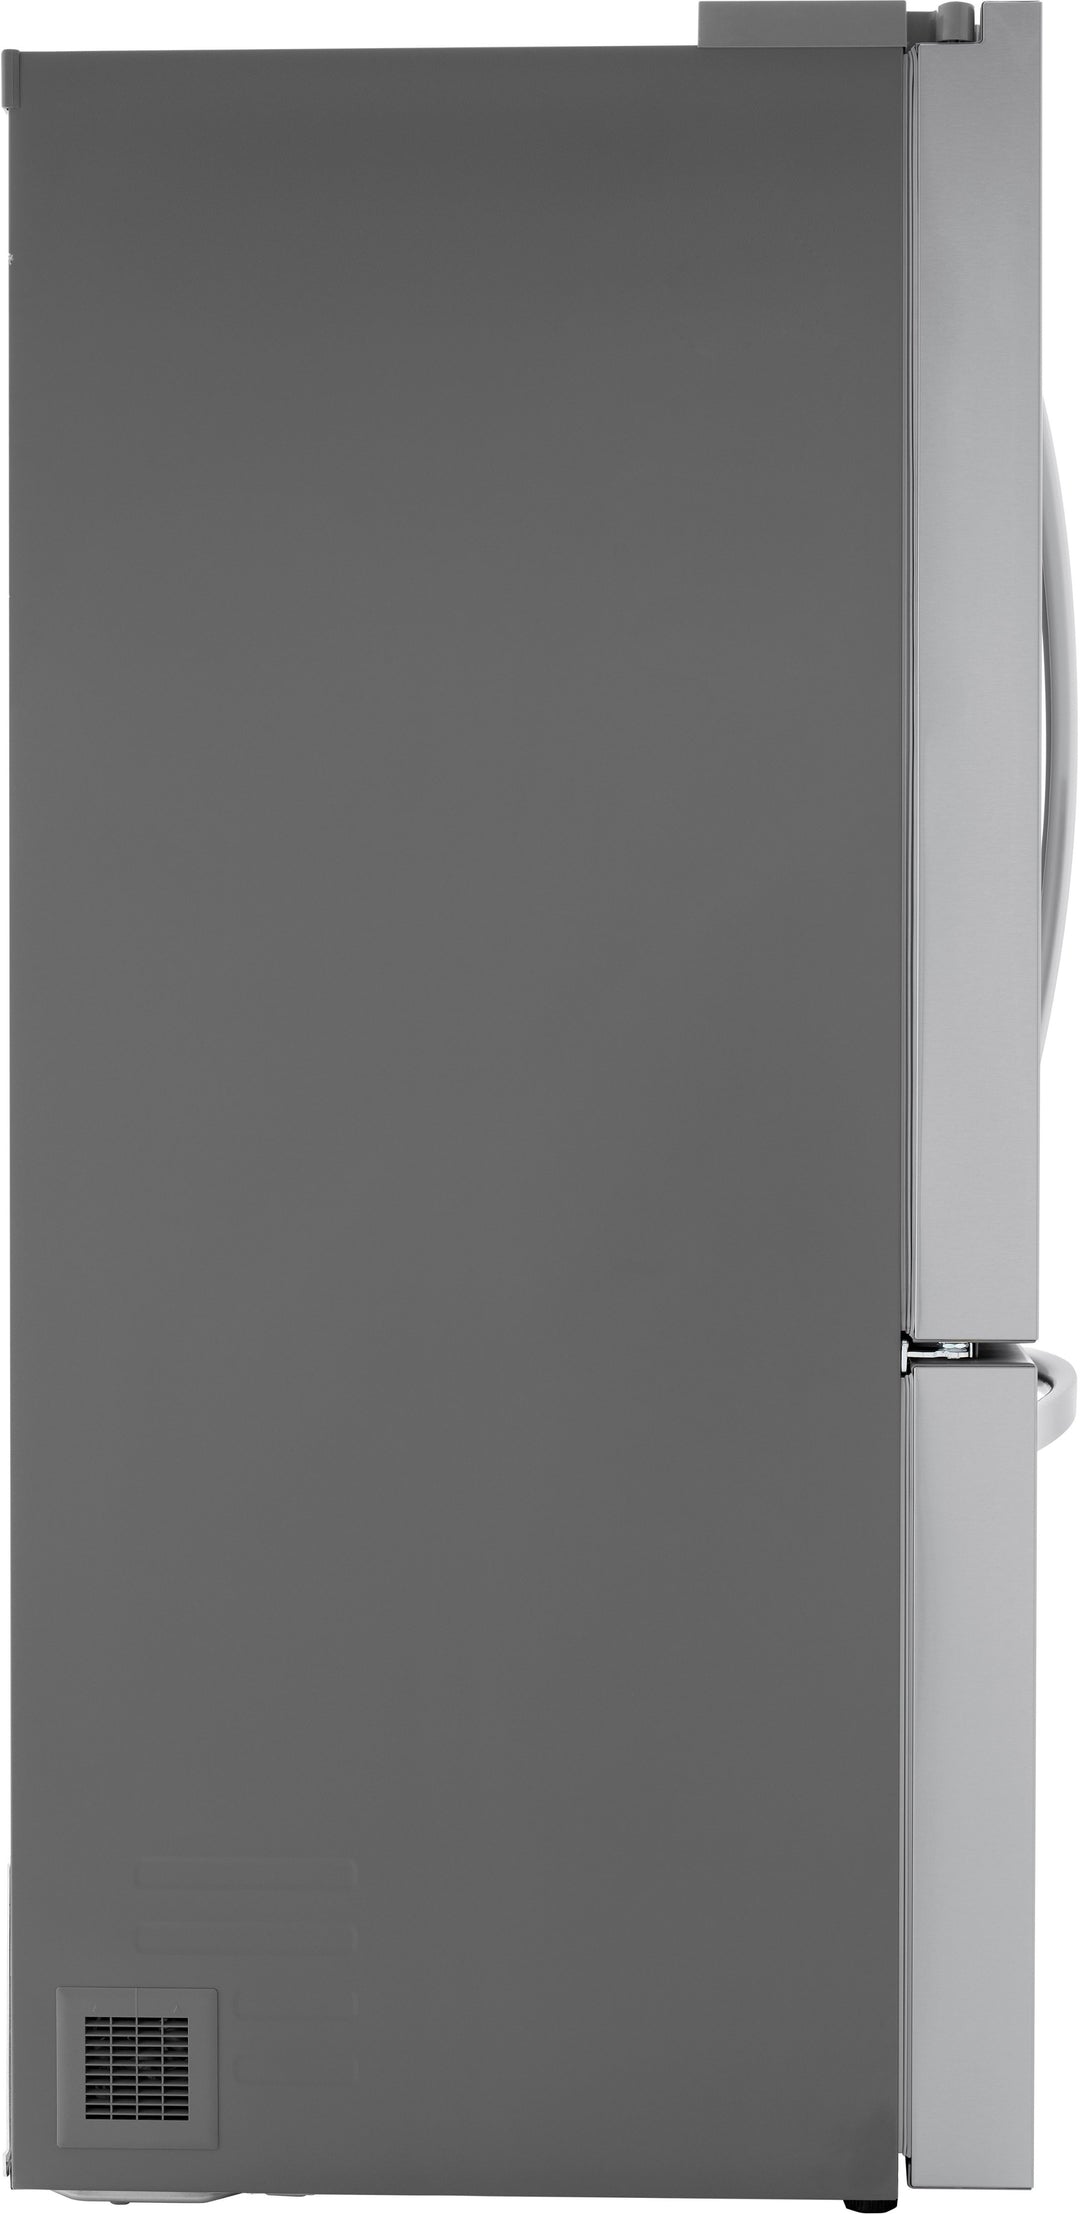 LG - 31.7 Cu. Ft. French Door Smart Refrigerator with Internal Water Dispenser - Stainless Steel_8